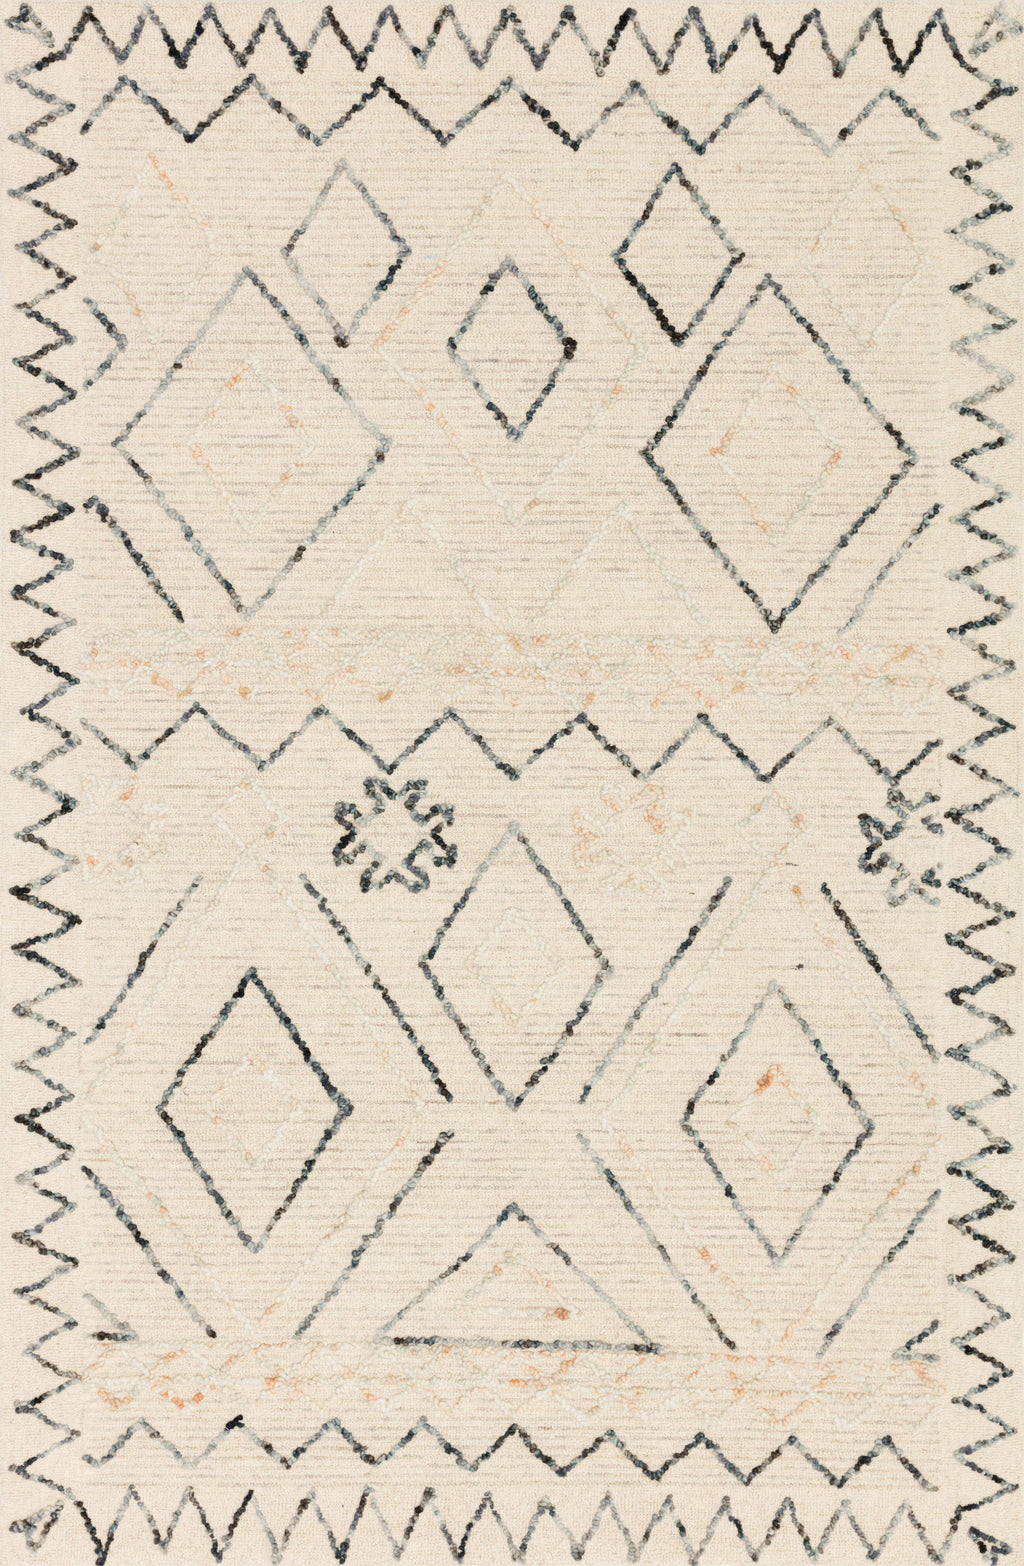 LEELA Collection Wool Rug  in  Oatmeal / Denim Beige Accent Hand-Tufted Wool